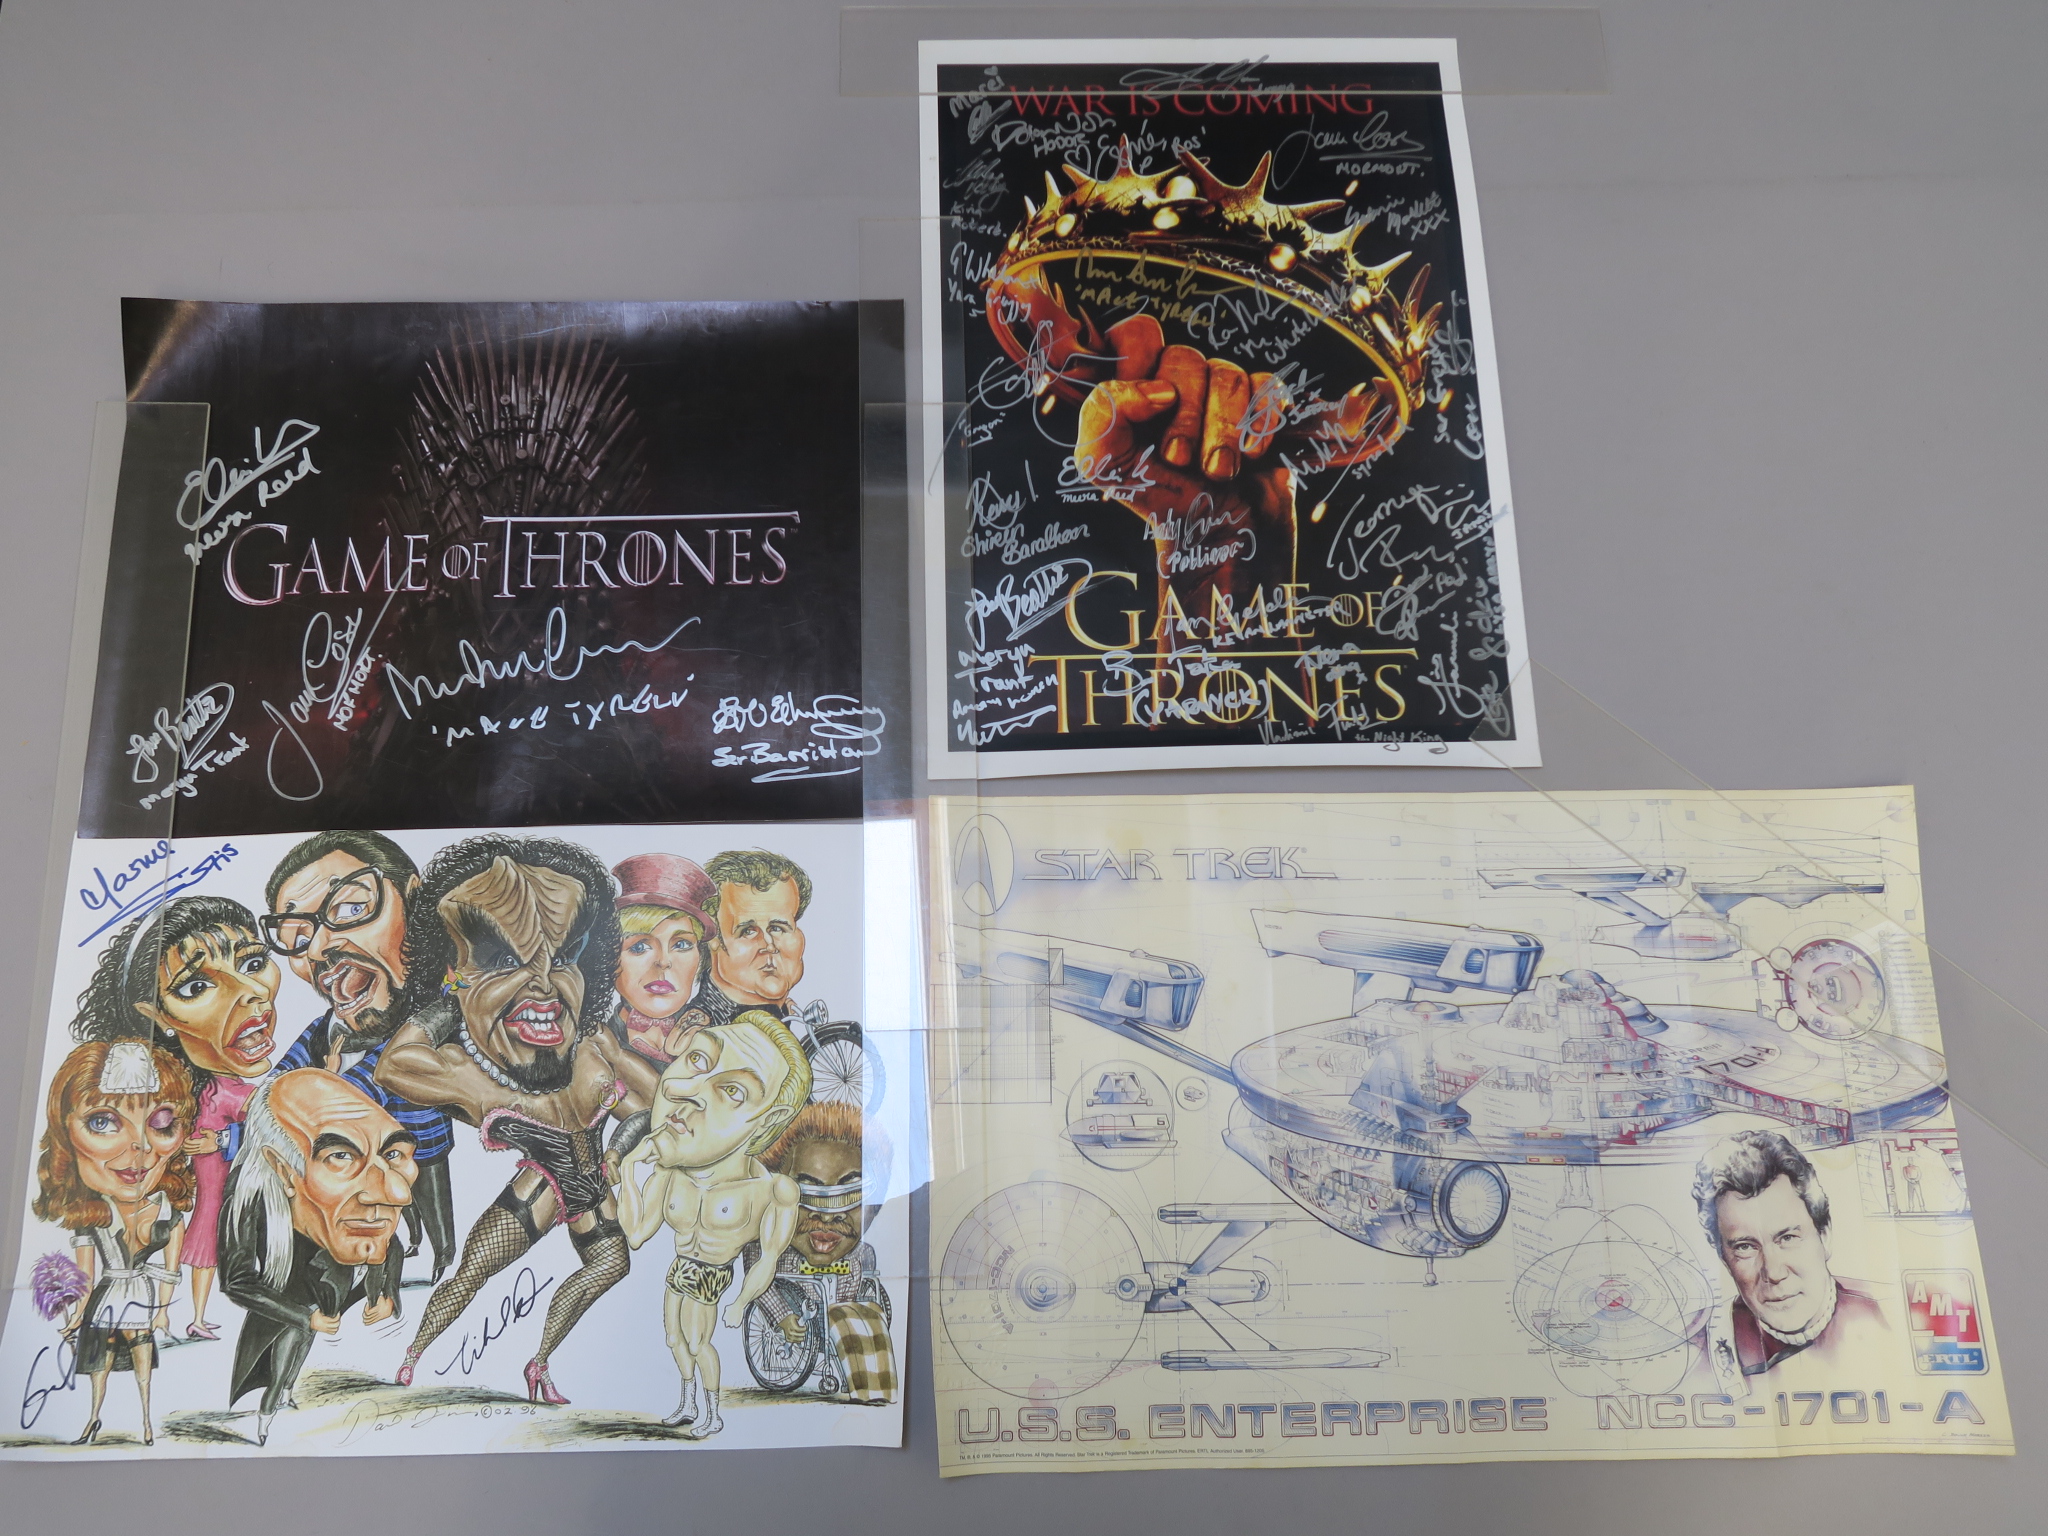 Signed posters including Game of Thrones cast signed posters (2) with signatures from The Night